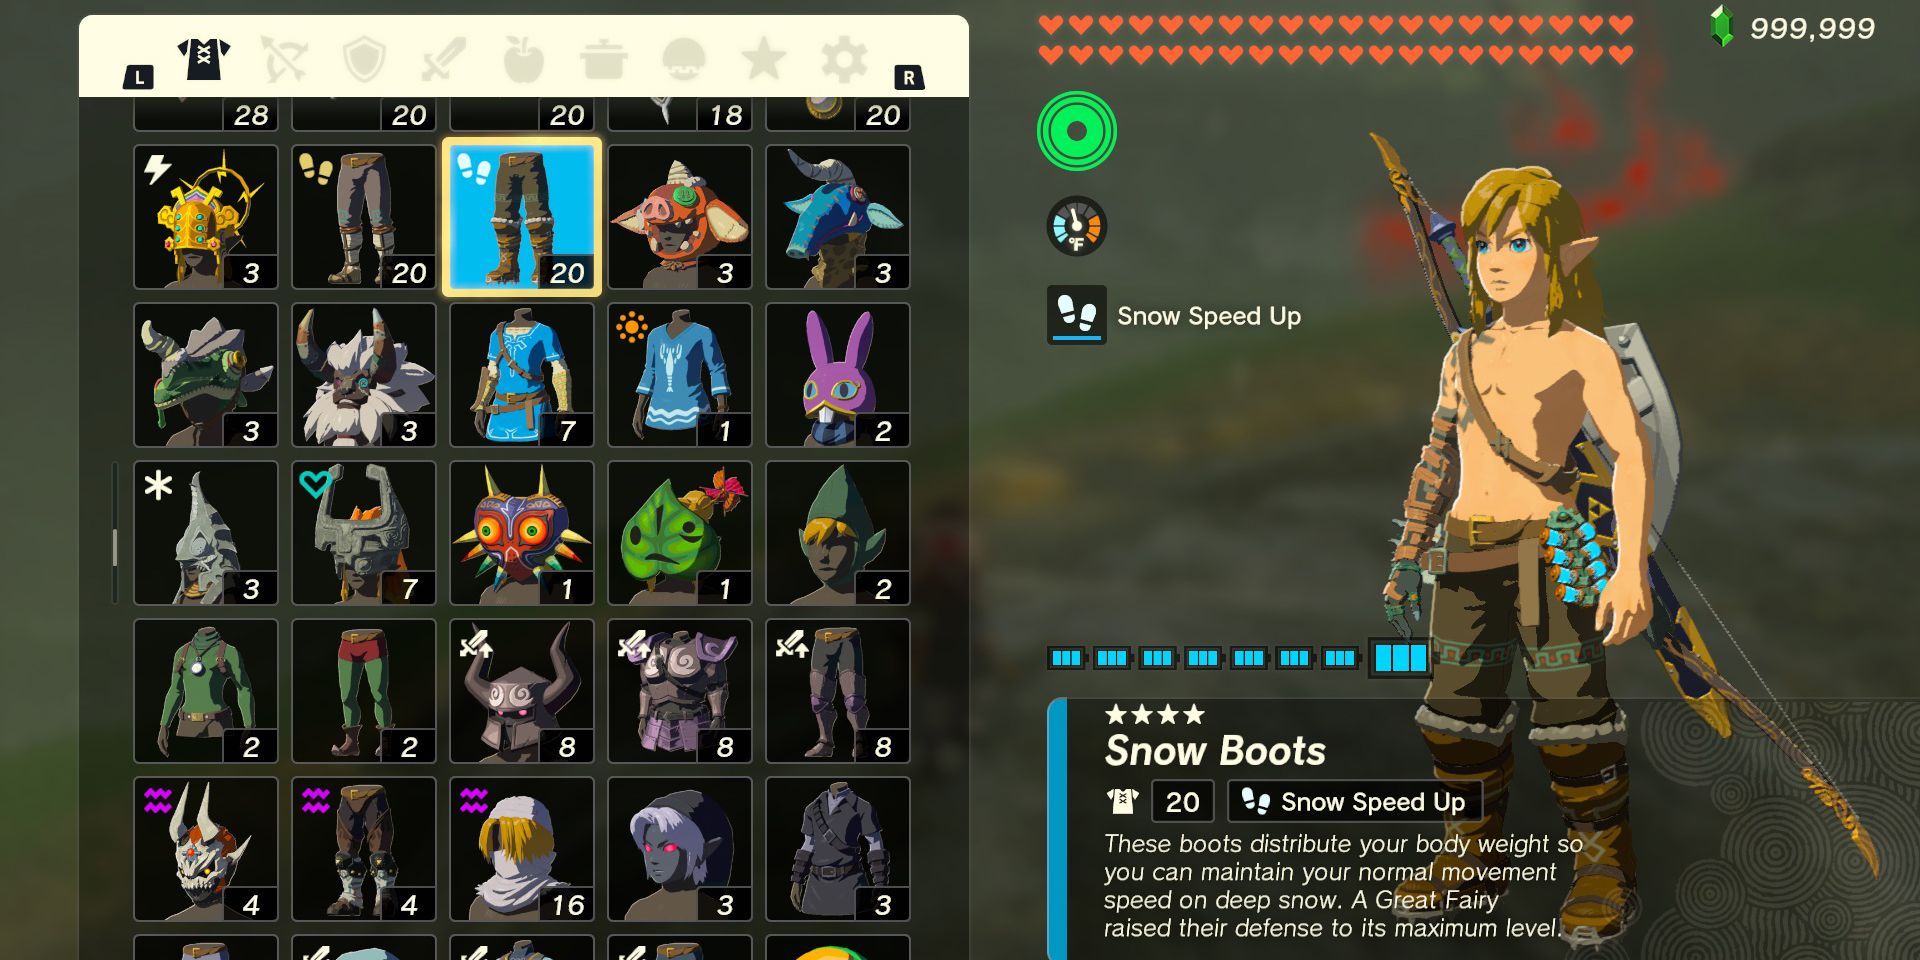 The Snowboot armor piece in The Legend of Zelda: Tears of the Kingdom